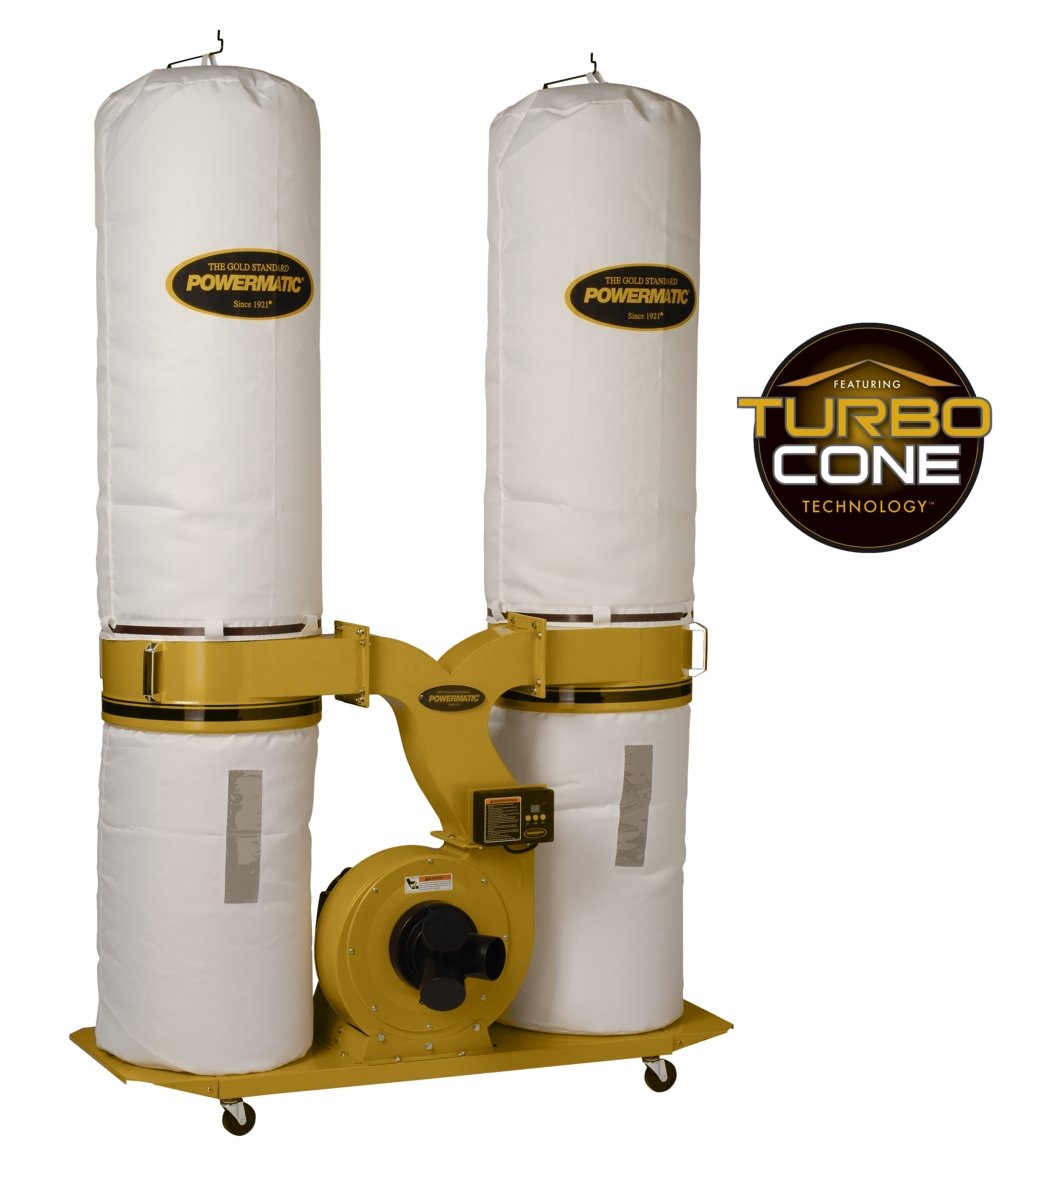 Powermatic PM1900TX-BK1 Dust Collector, 3HP 1PH 230V, 30-Micron Bag Filter Kit | Dust Collector | Hamilton Lee Supply